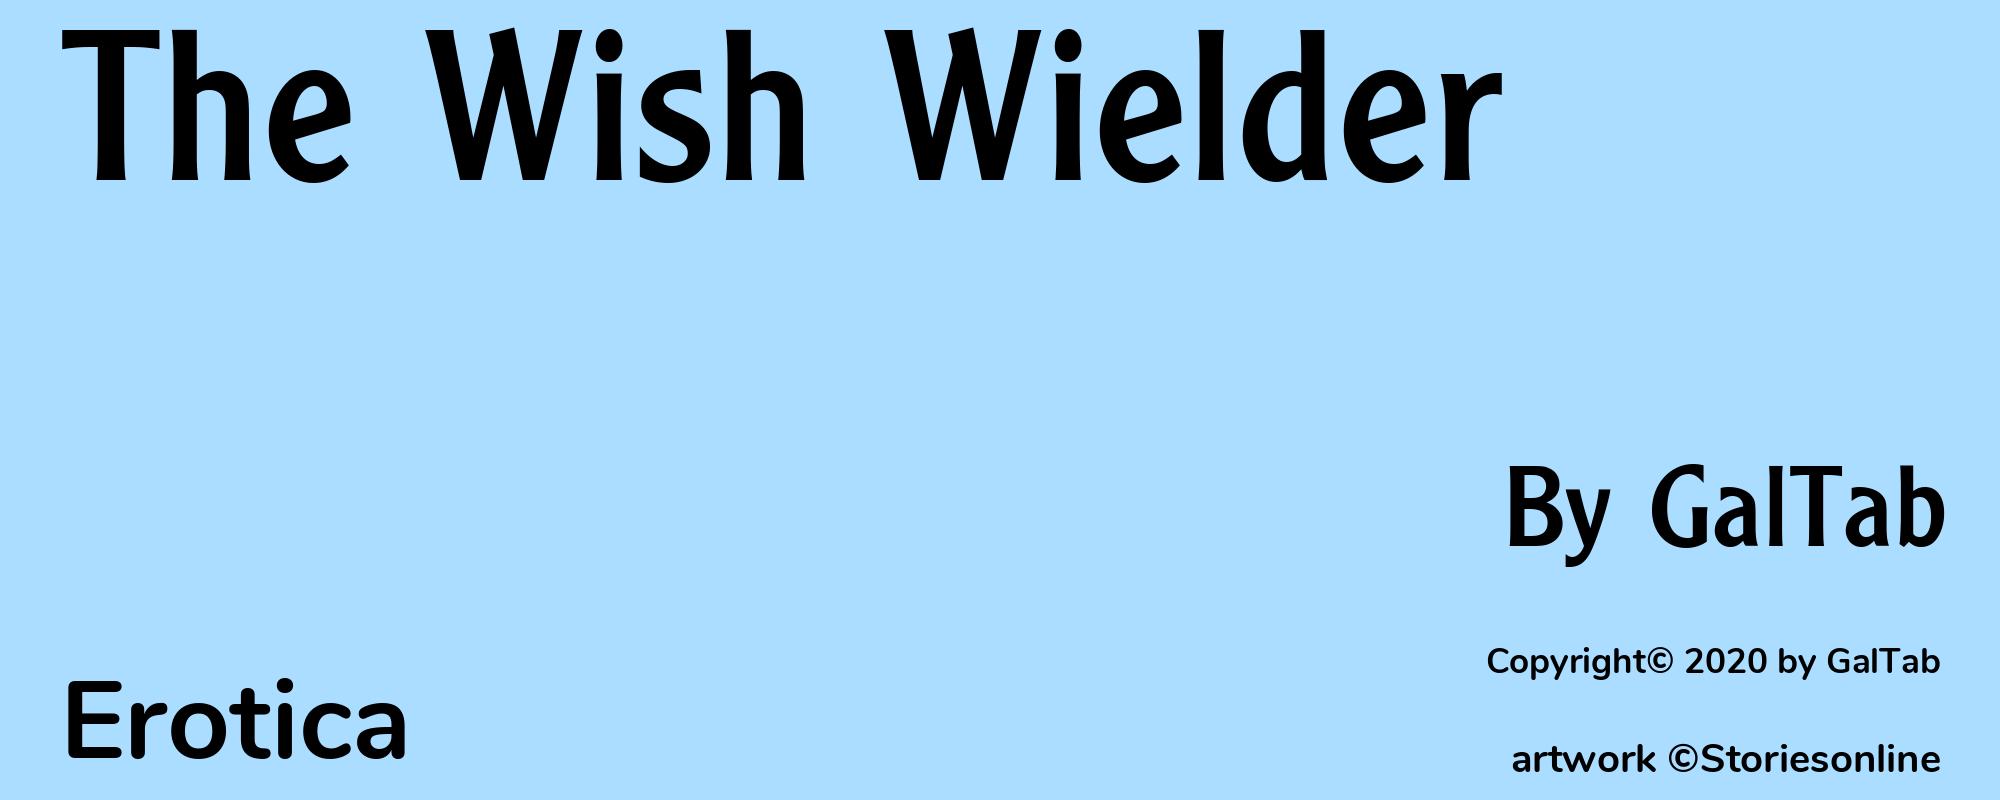 The Wish Wielder - Cover